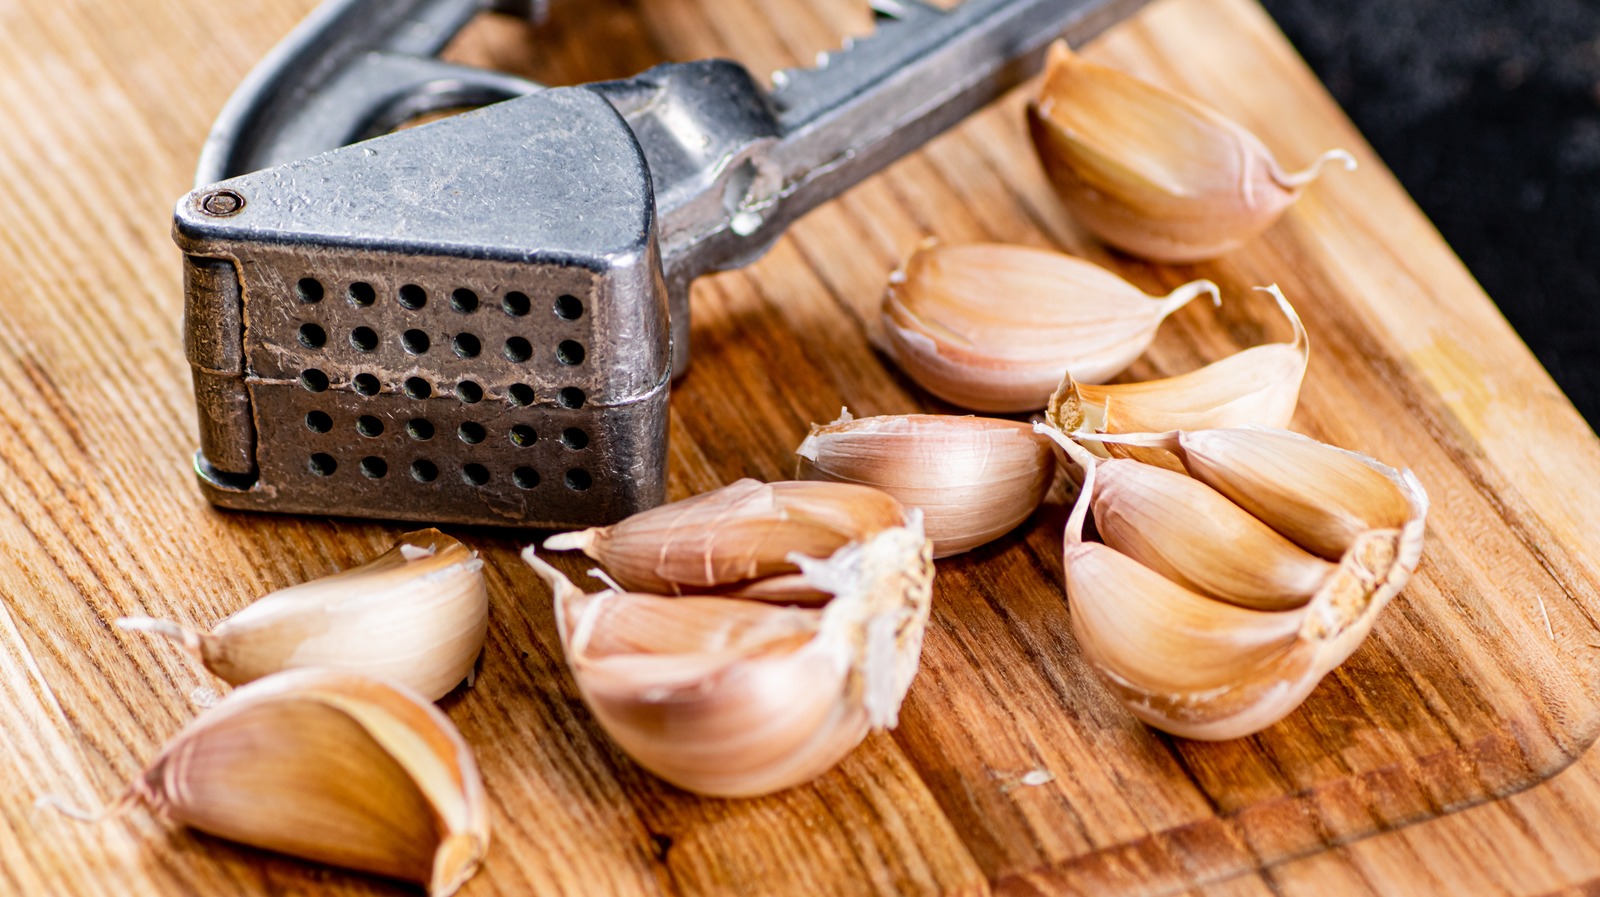 https://www.tastingtable.com/img/gallery/what-to-consider-when-buying-a-garlic-press/l-intro-1663168862.jpg